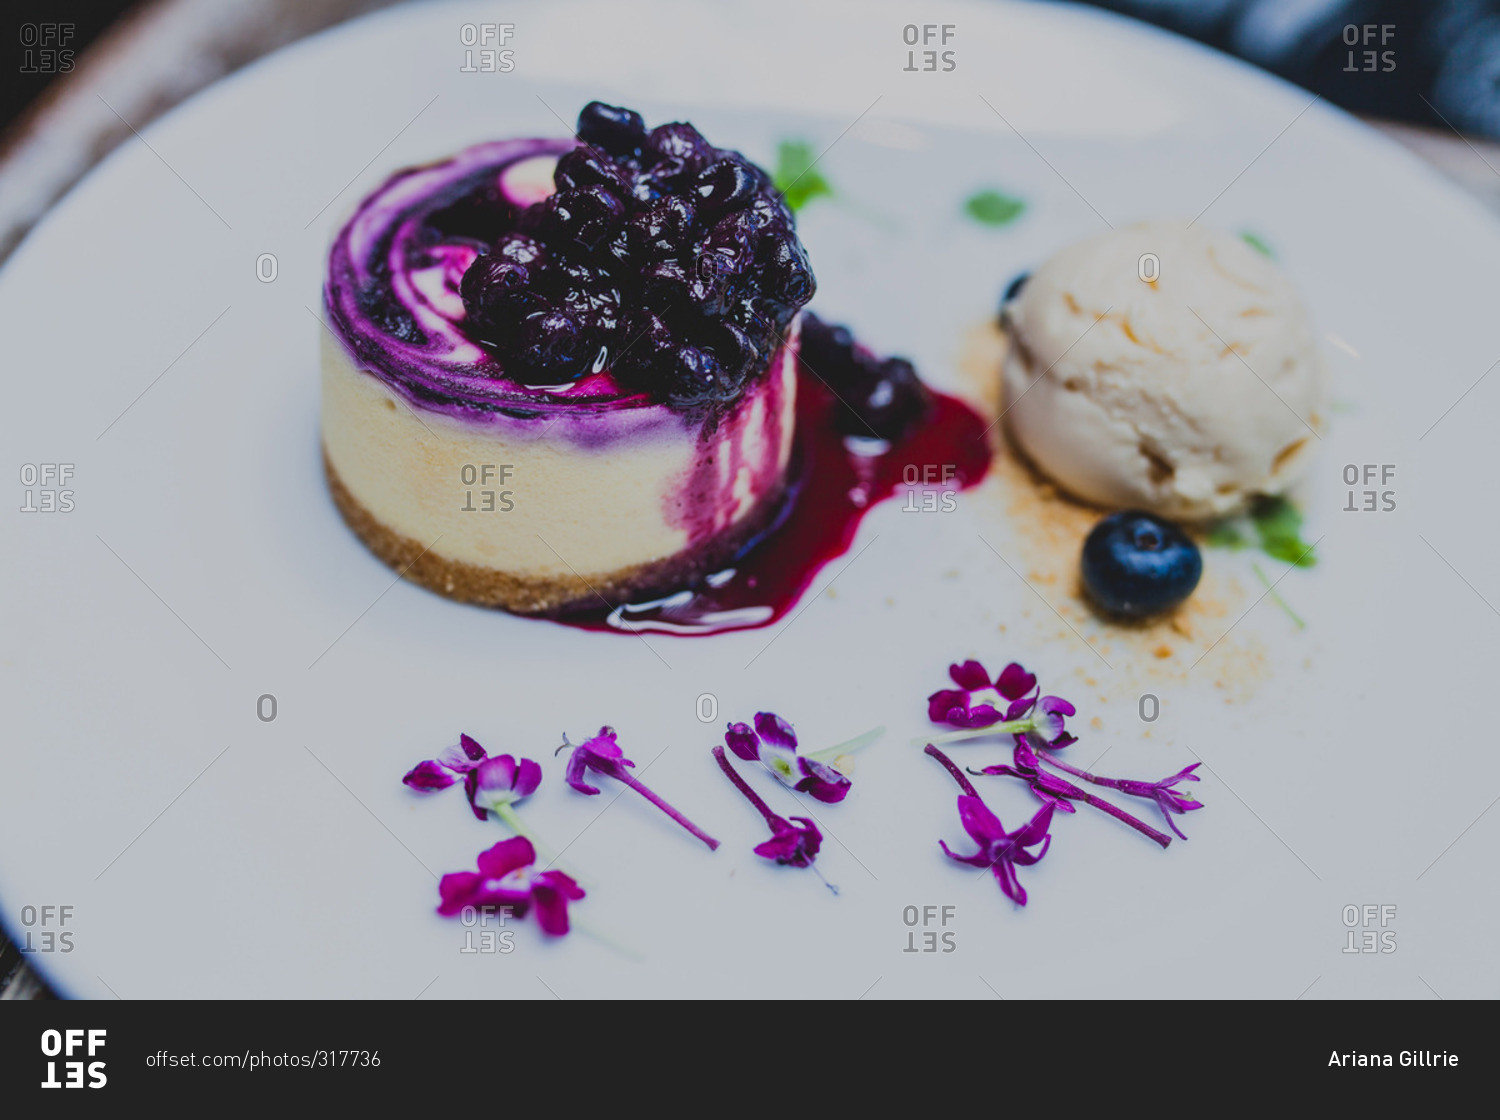 Elevated view of blueberry cheesecake with ice cream and purple flowers